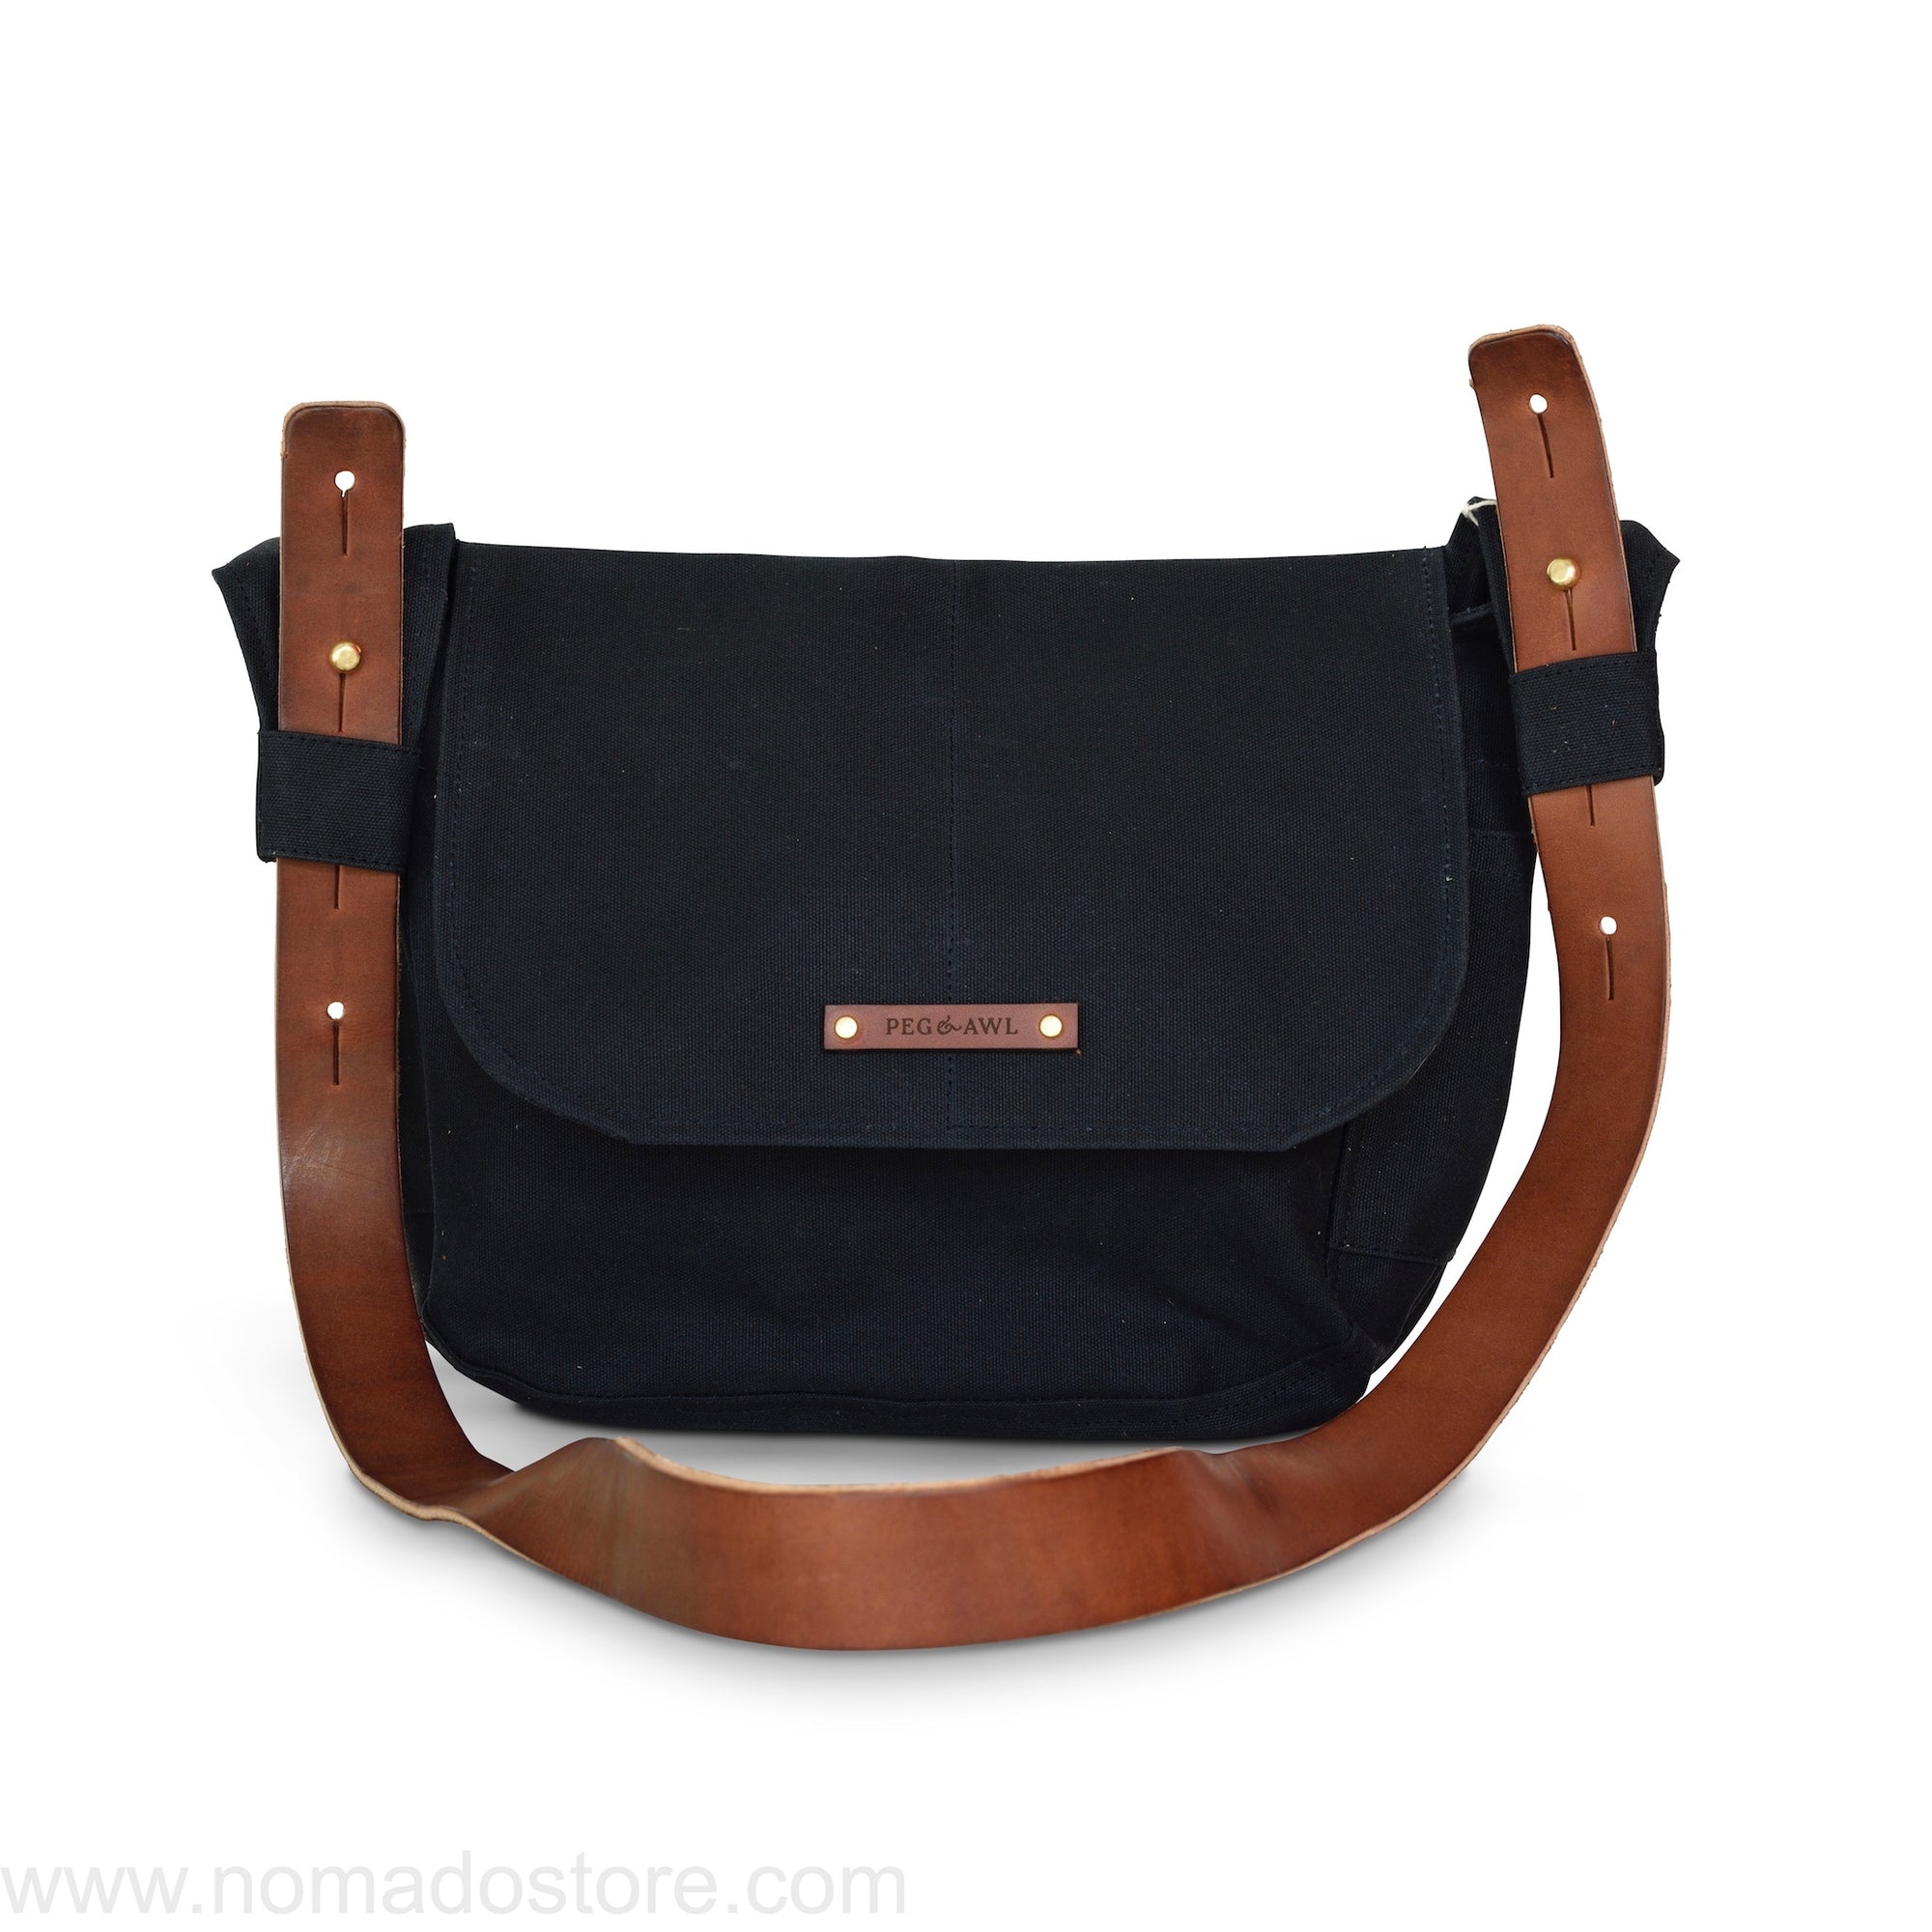 Peg and Awl The Finch Satchel - Coal - NOMADO Store 